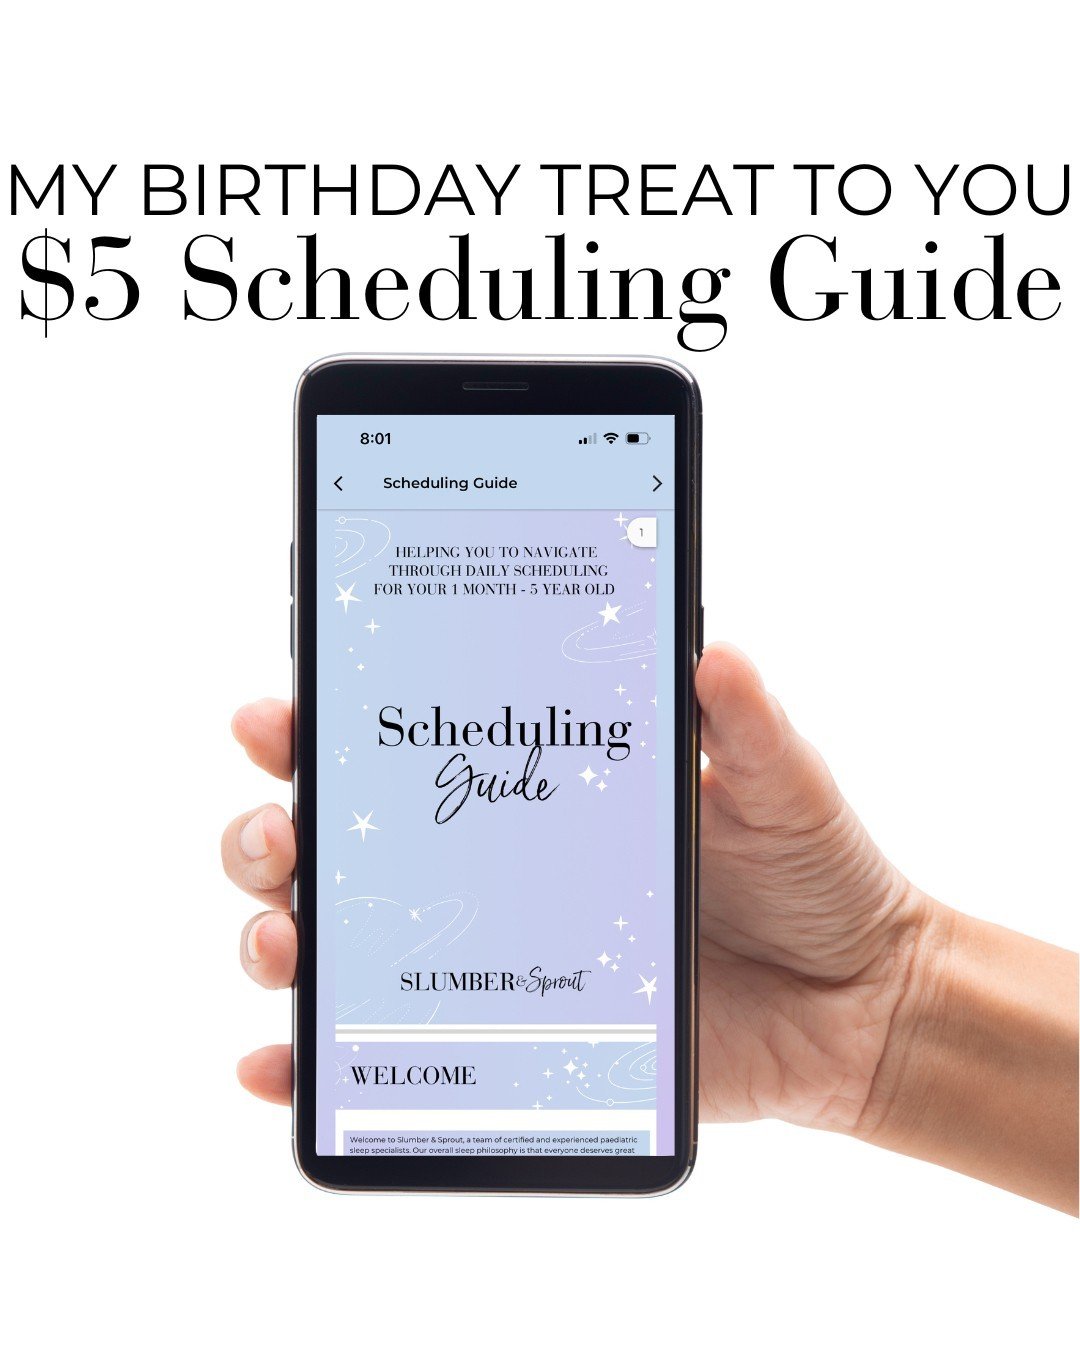 Introducing our ultimate Scheduling Guide &ndash; your key to seamless planning for your child's sleep, feeds, and mealtimes 😴⁠
⁠
....Say goodbye 👋 to rigid schedules that just don't fit your family's lifestyle⁠
⁠
Our guide is simple, realistic, an